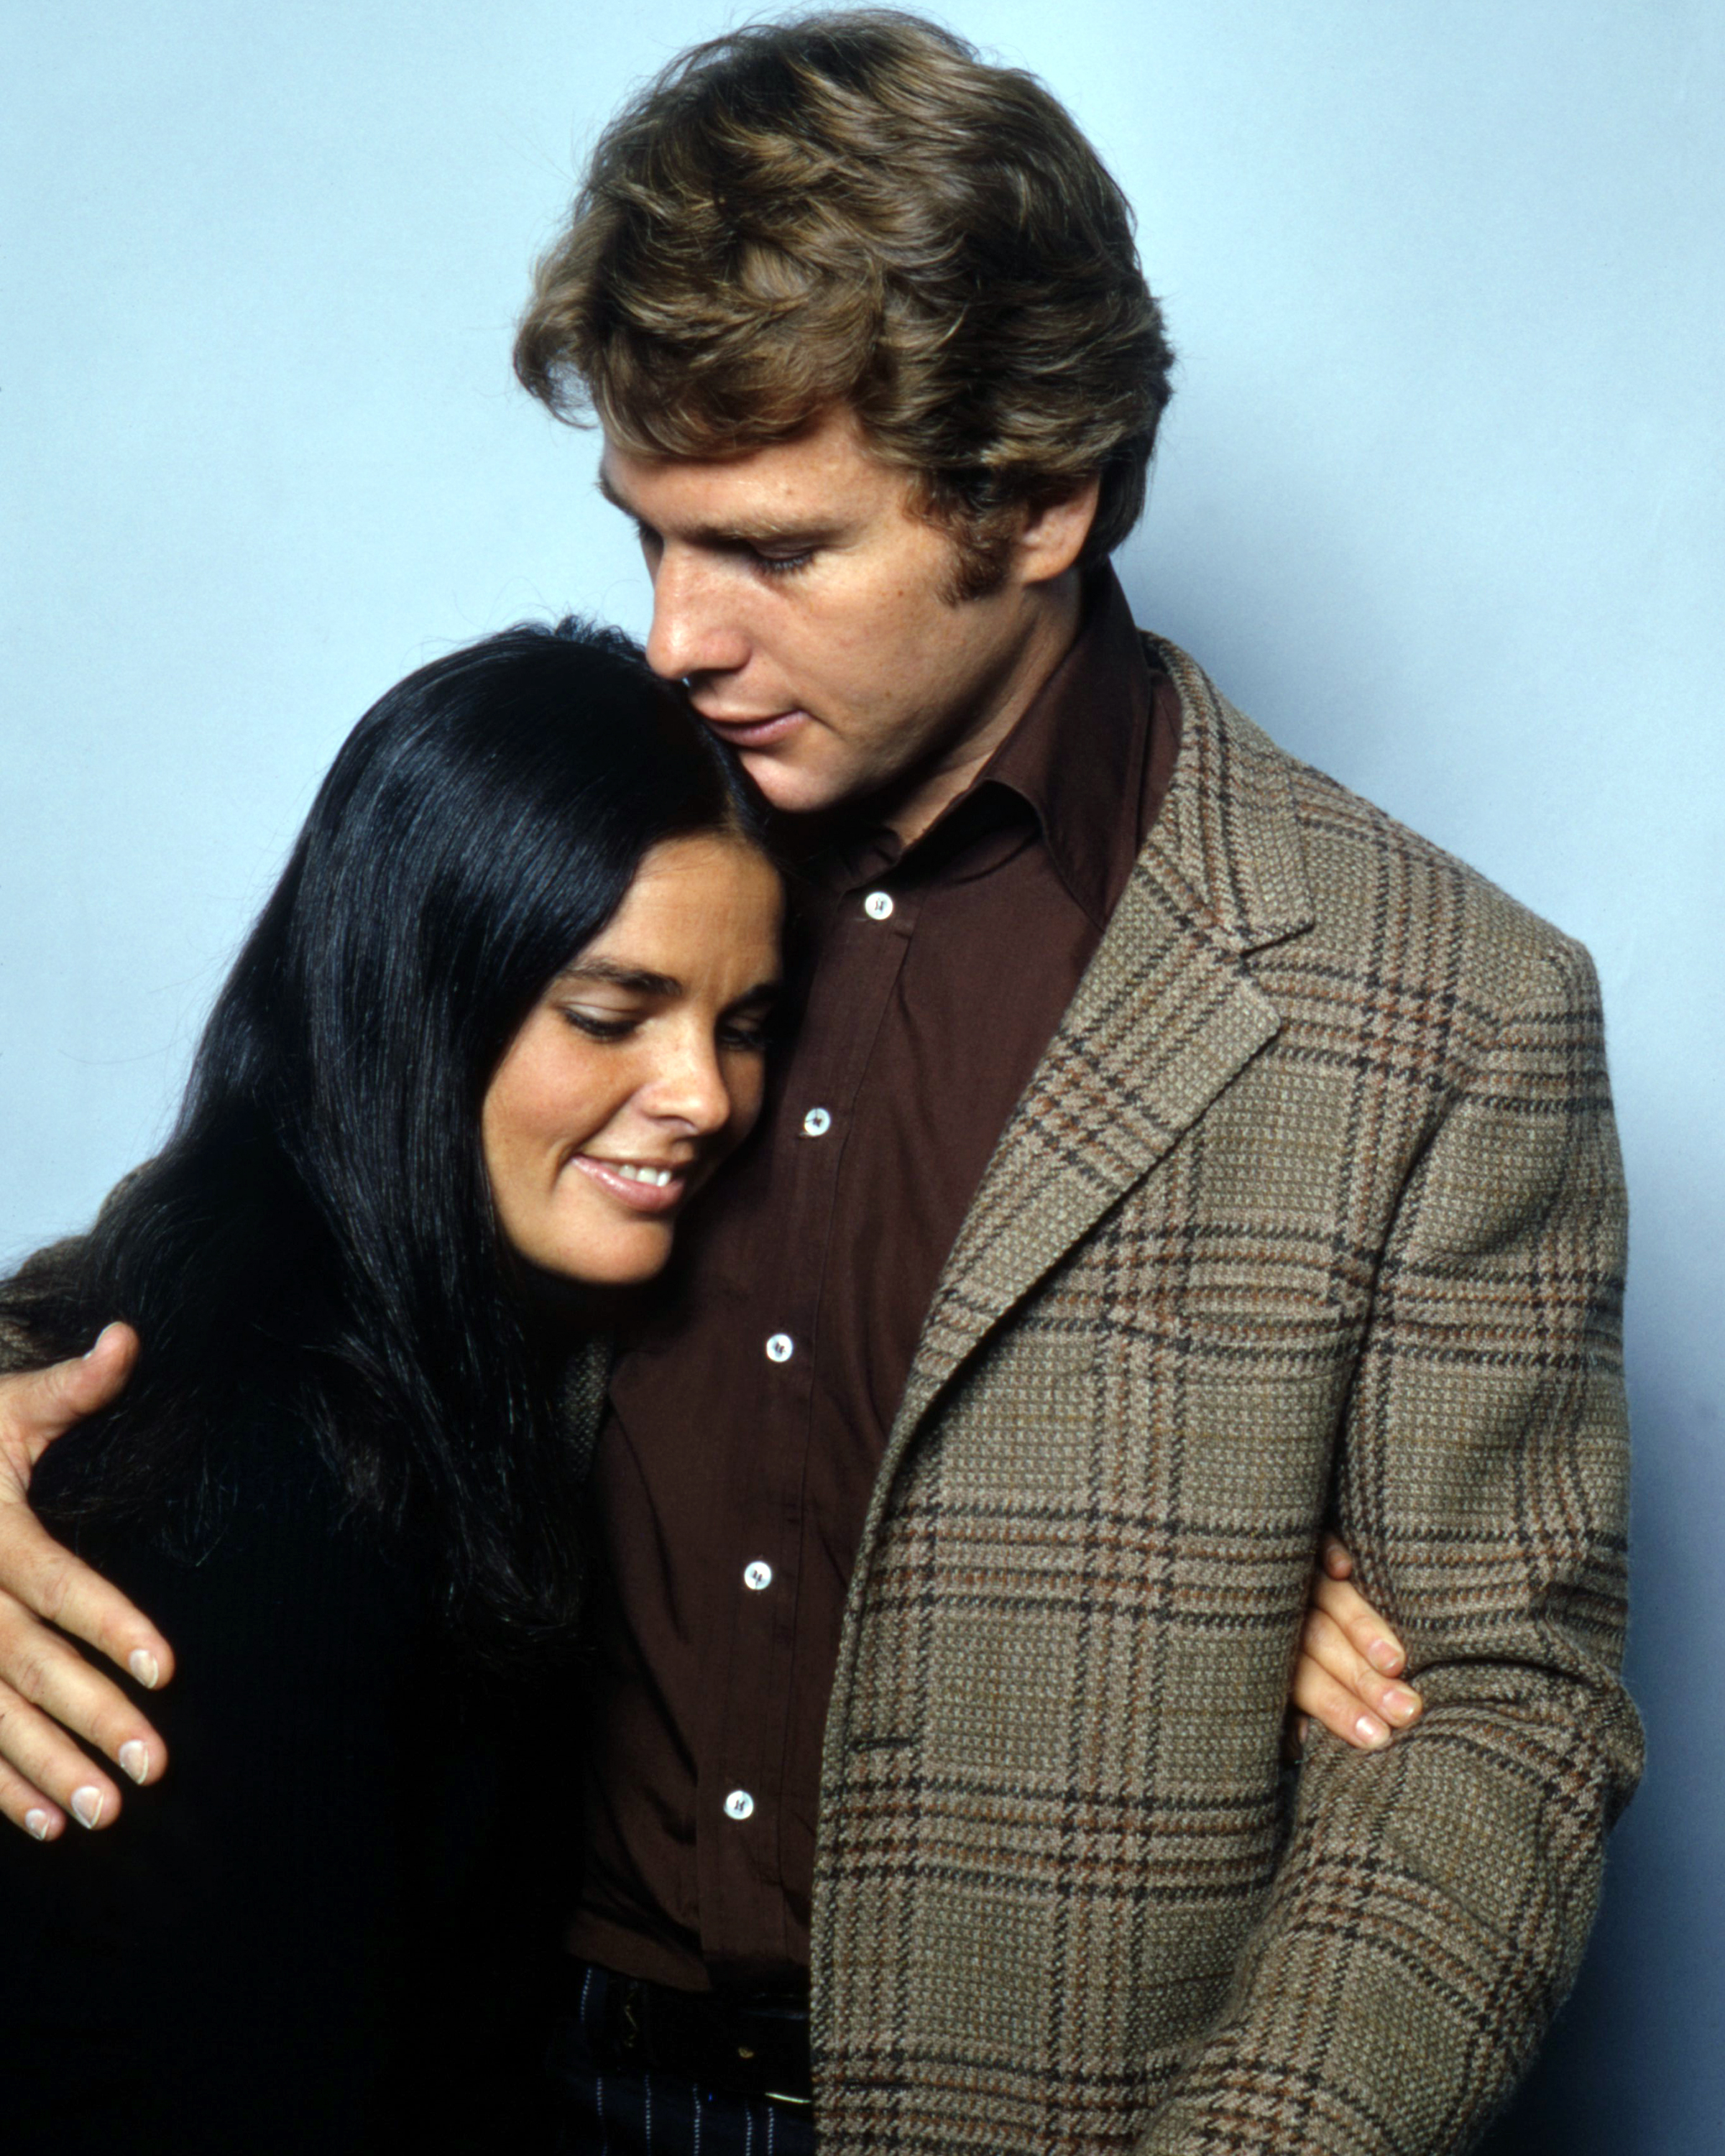 American actors Ryan O'Neal and Ali MacGraw in a promotional still for the 1970 film "Love Story." | Source: Getty Images